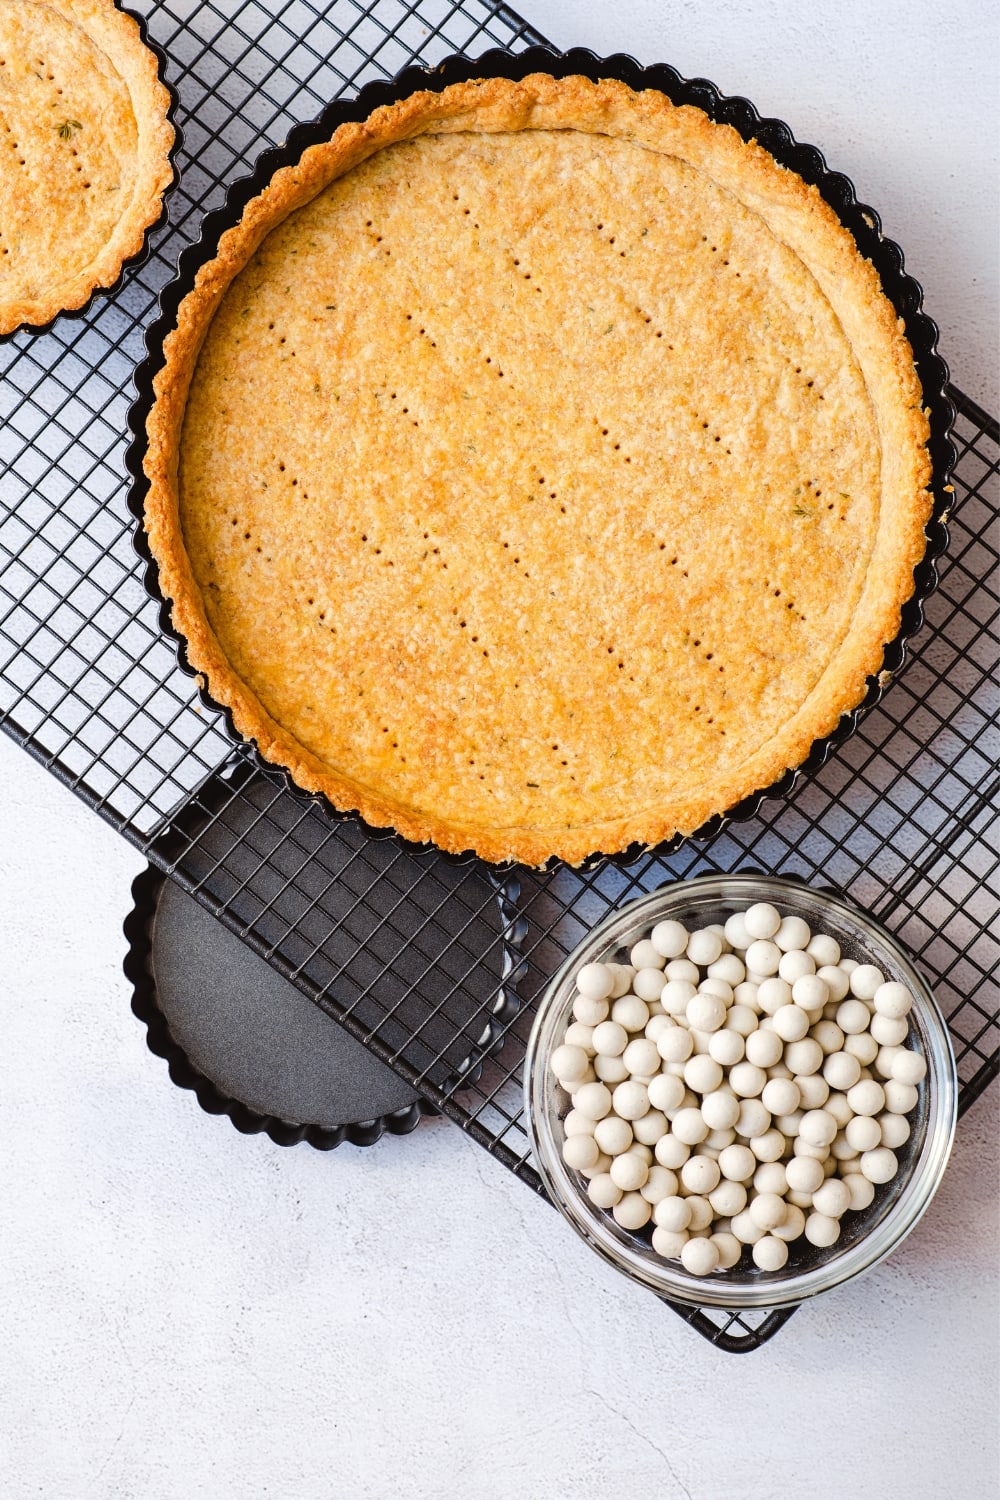 Golden Pie with a Bowl of Beans